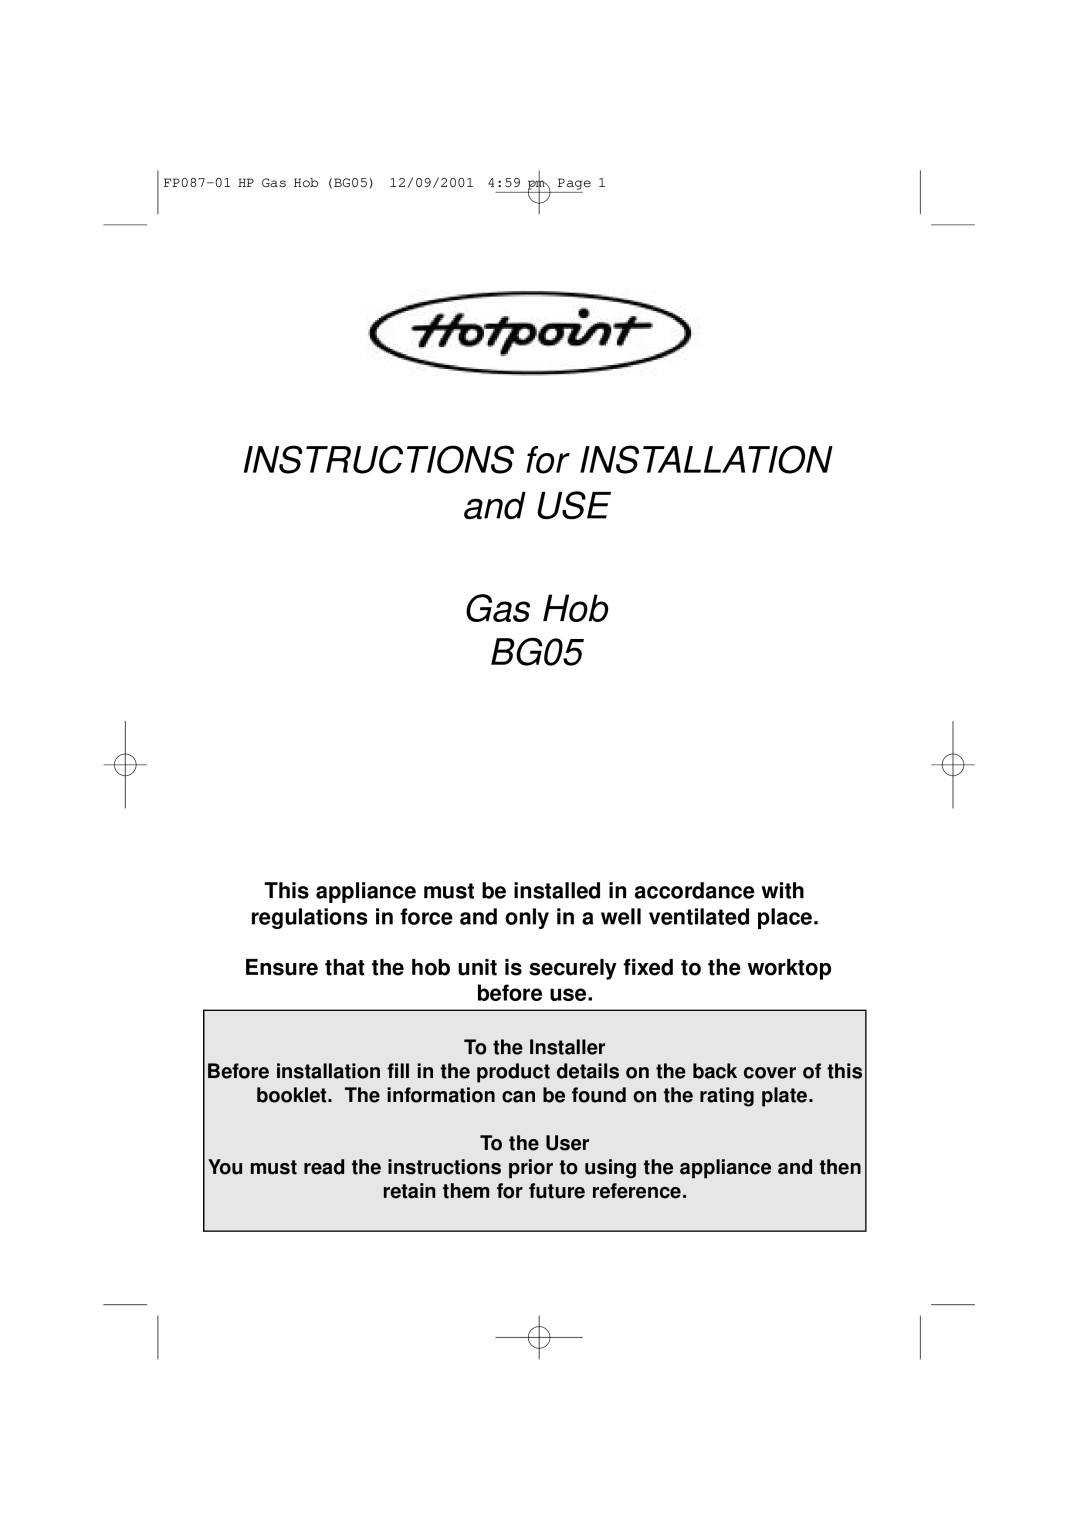 Hotpoint manual INSTRUCTIONS for INSTALLATION and USE Gas Hob BG05, To the Installer, retain them for future reference 